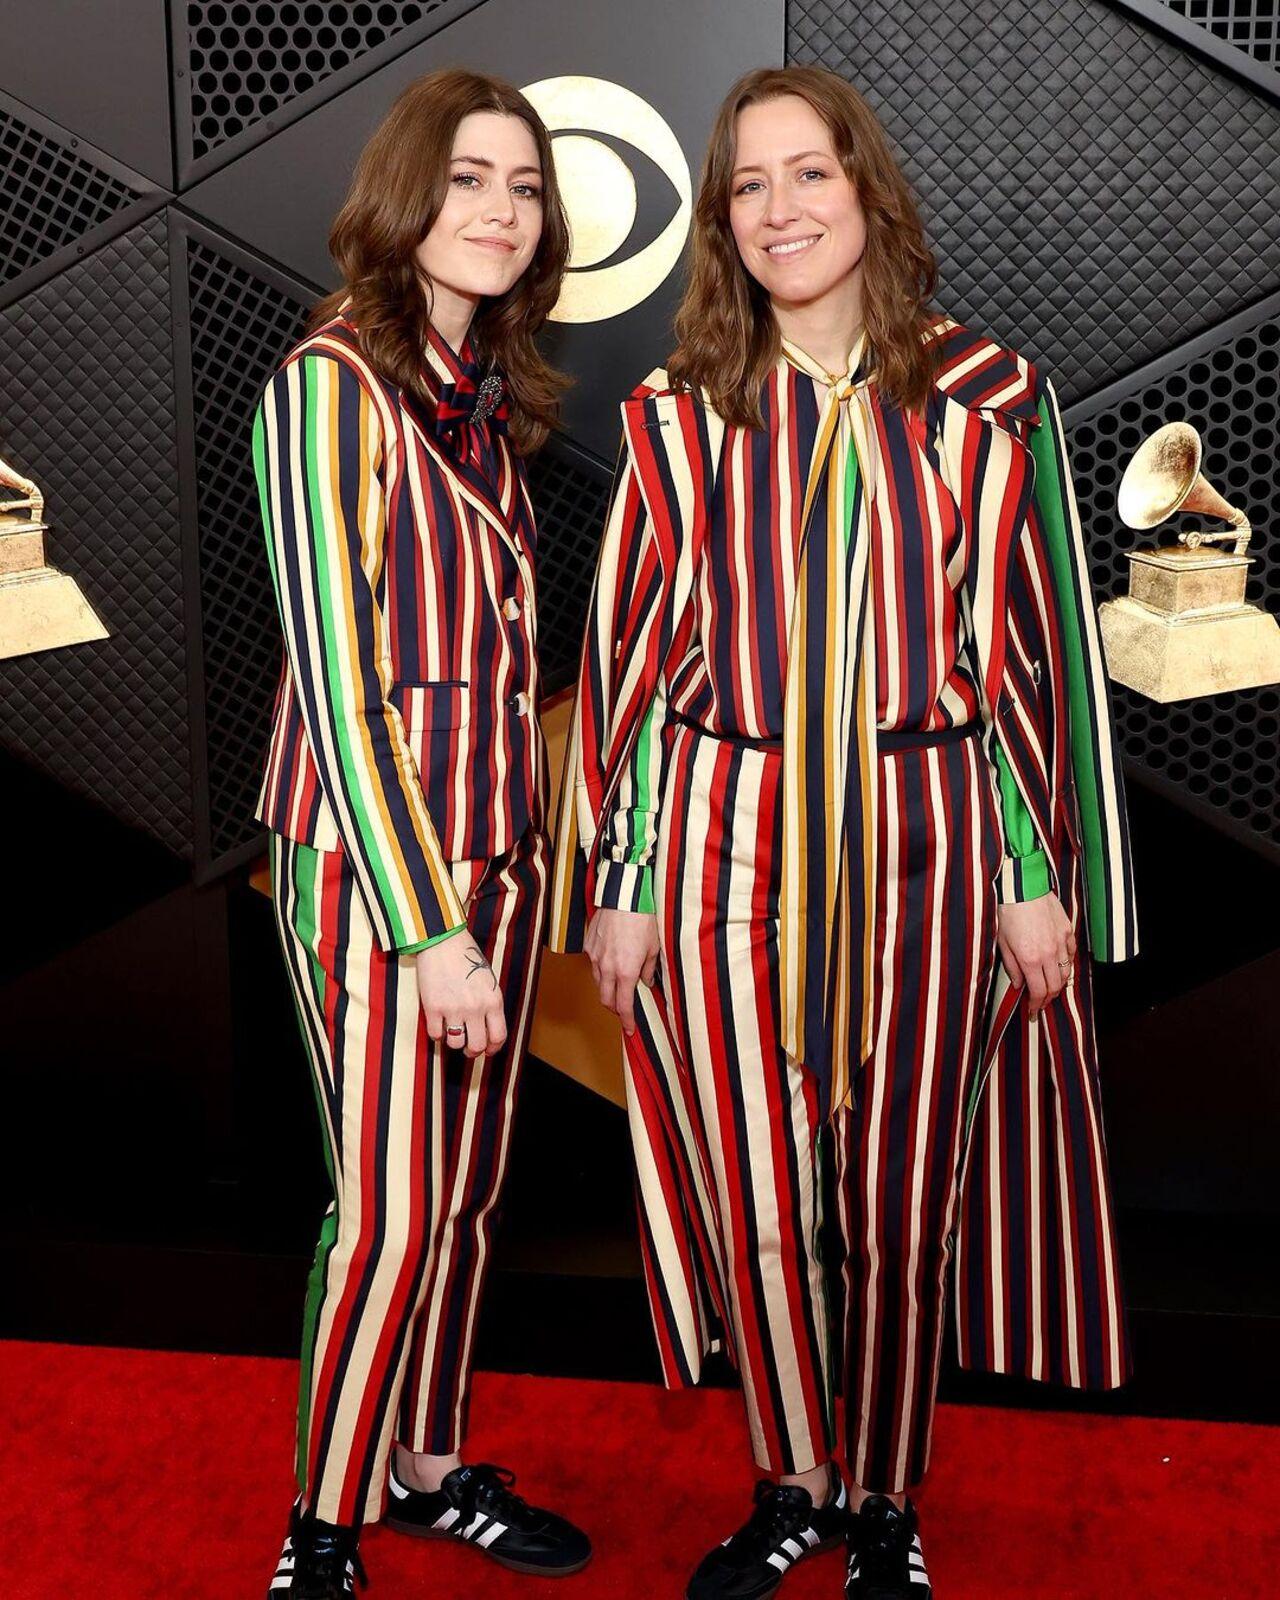 Rebecca and Megan Lovell twin and win in this colourful striped suit for the big night